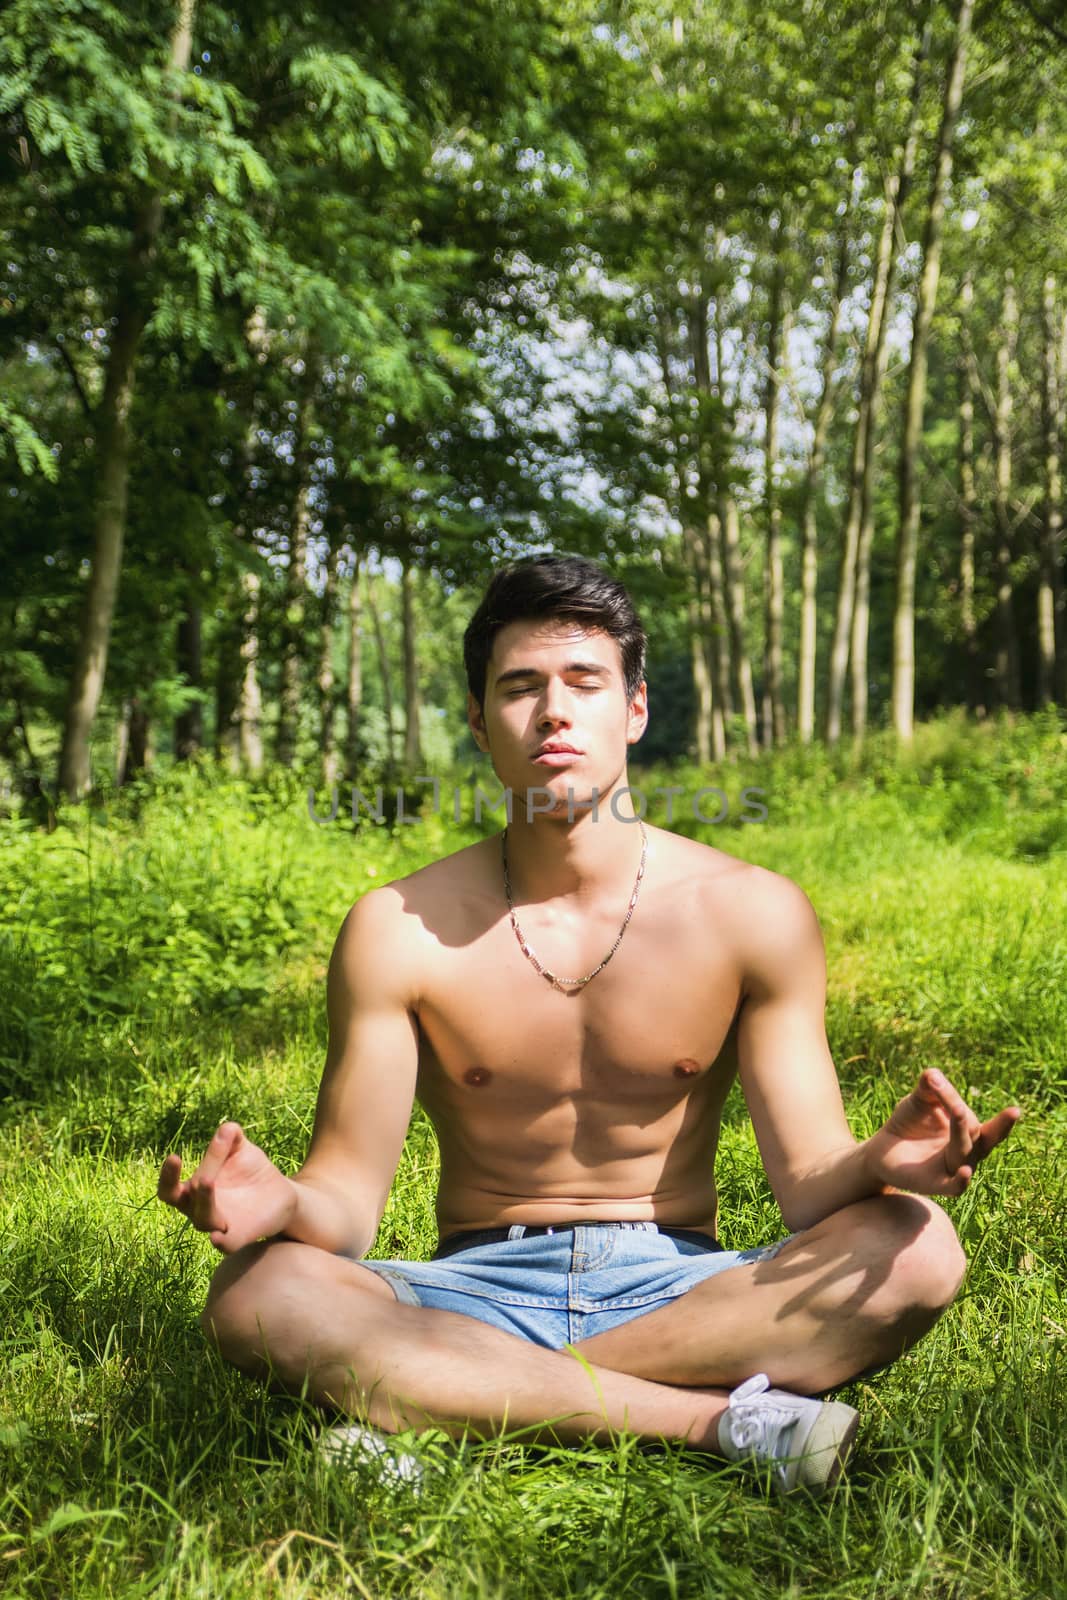 Young Man Meditating or Doing Outdoor Yoga Exercise by artofphoto